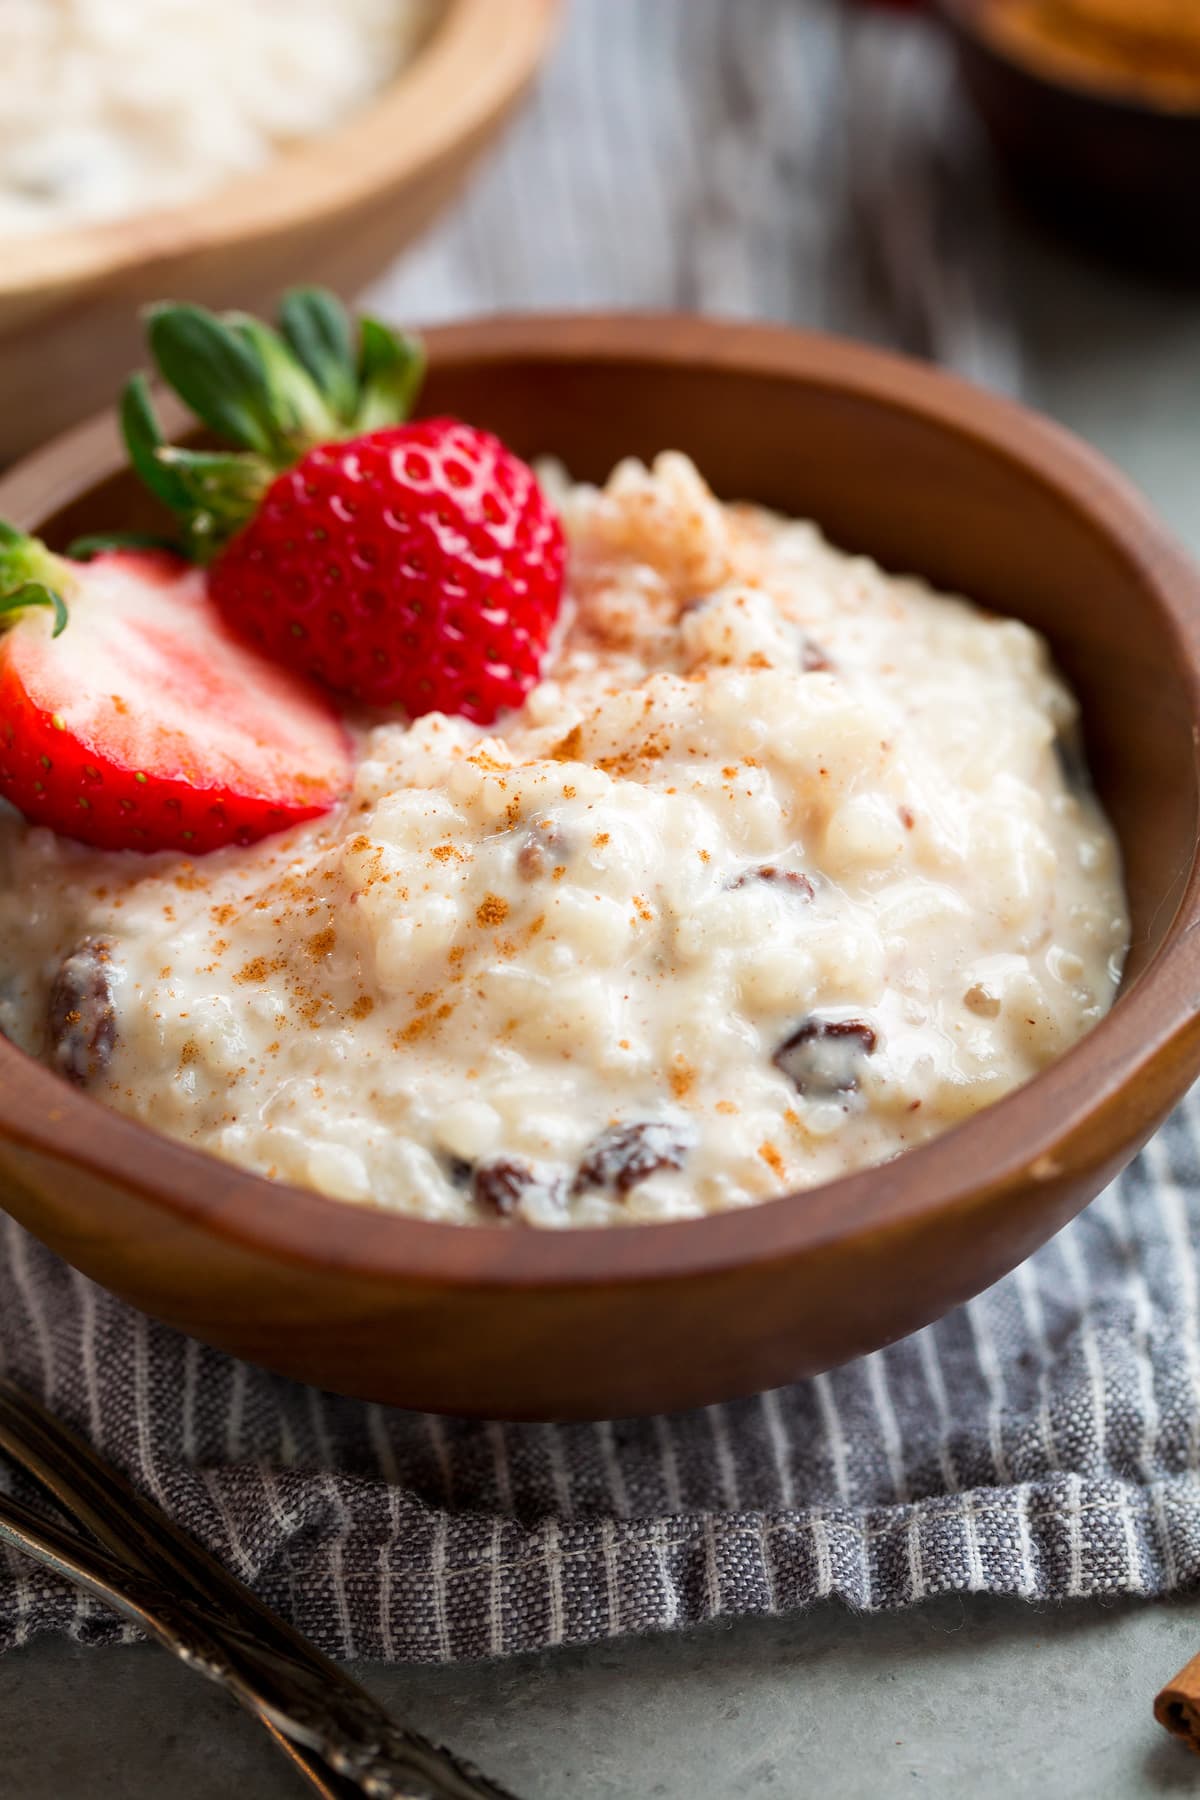 Close up image of rice pudding in a small bowl, garnished with strawberries and cinnamon.